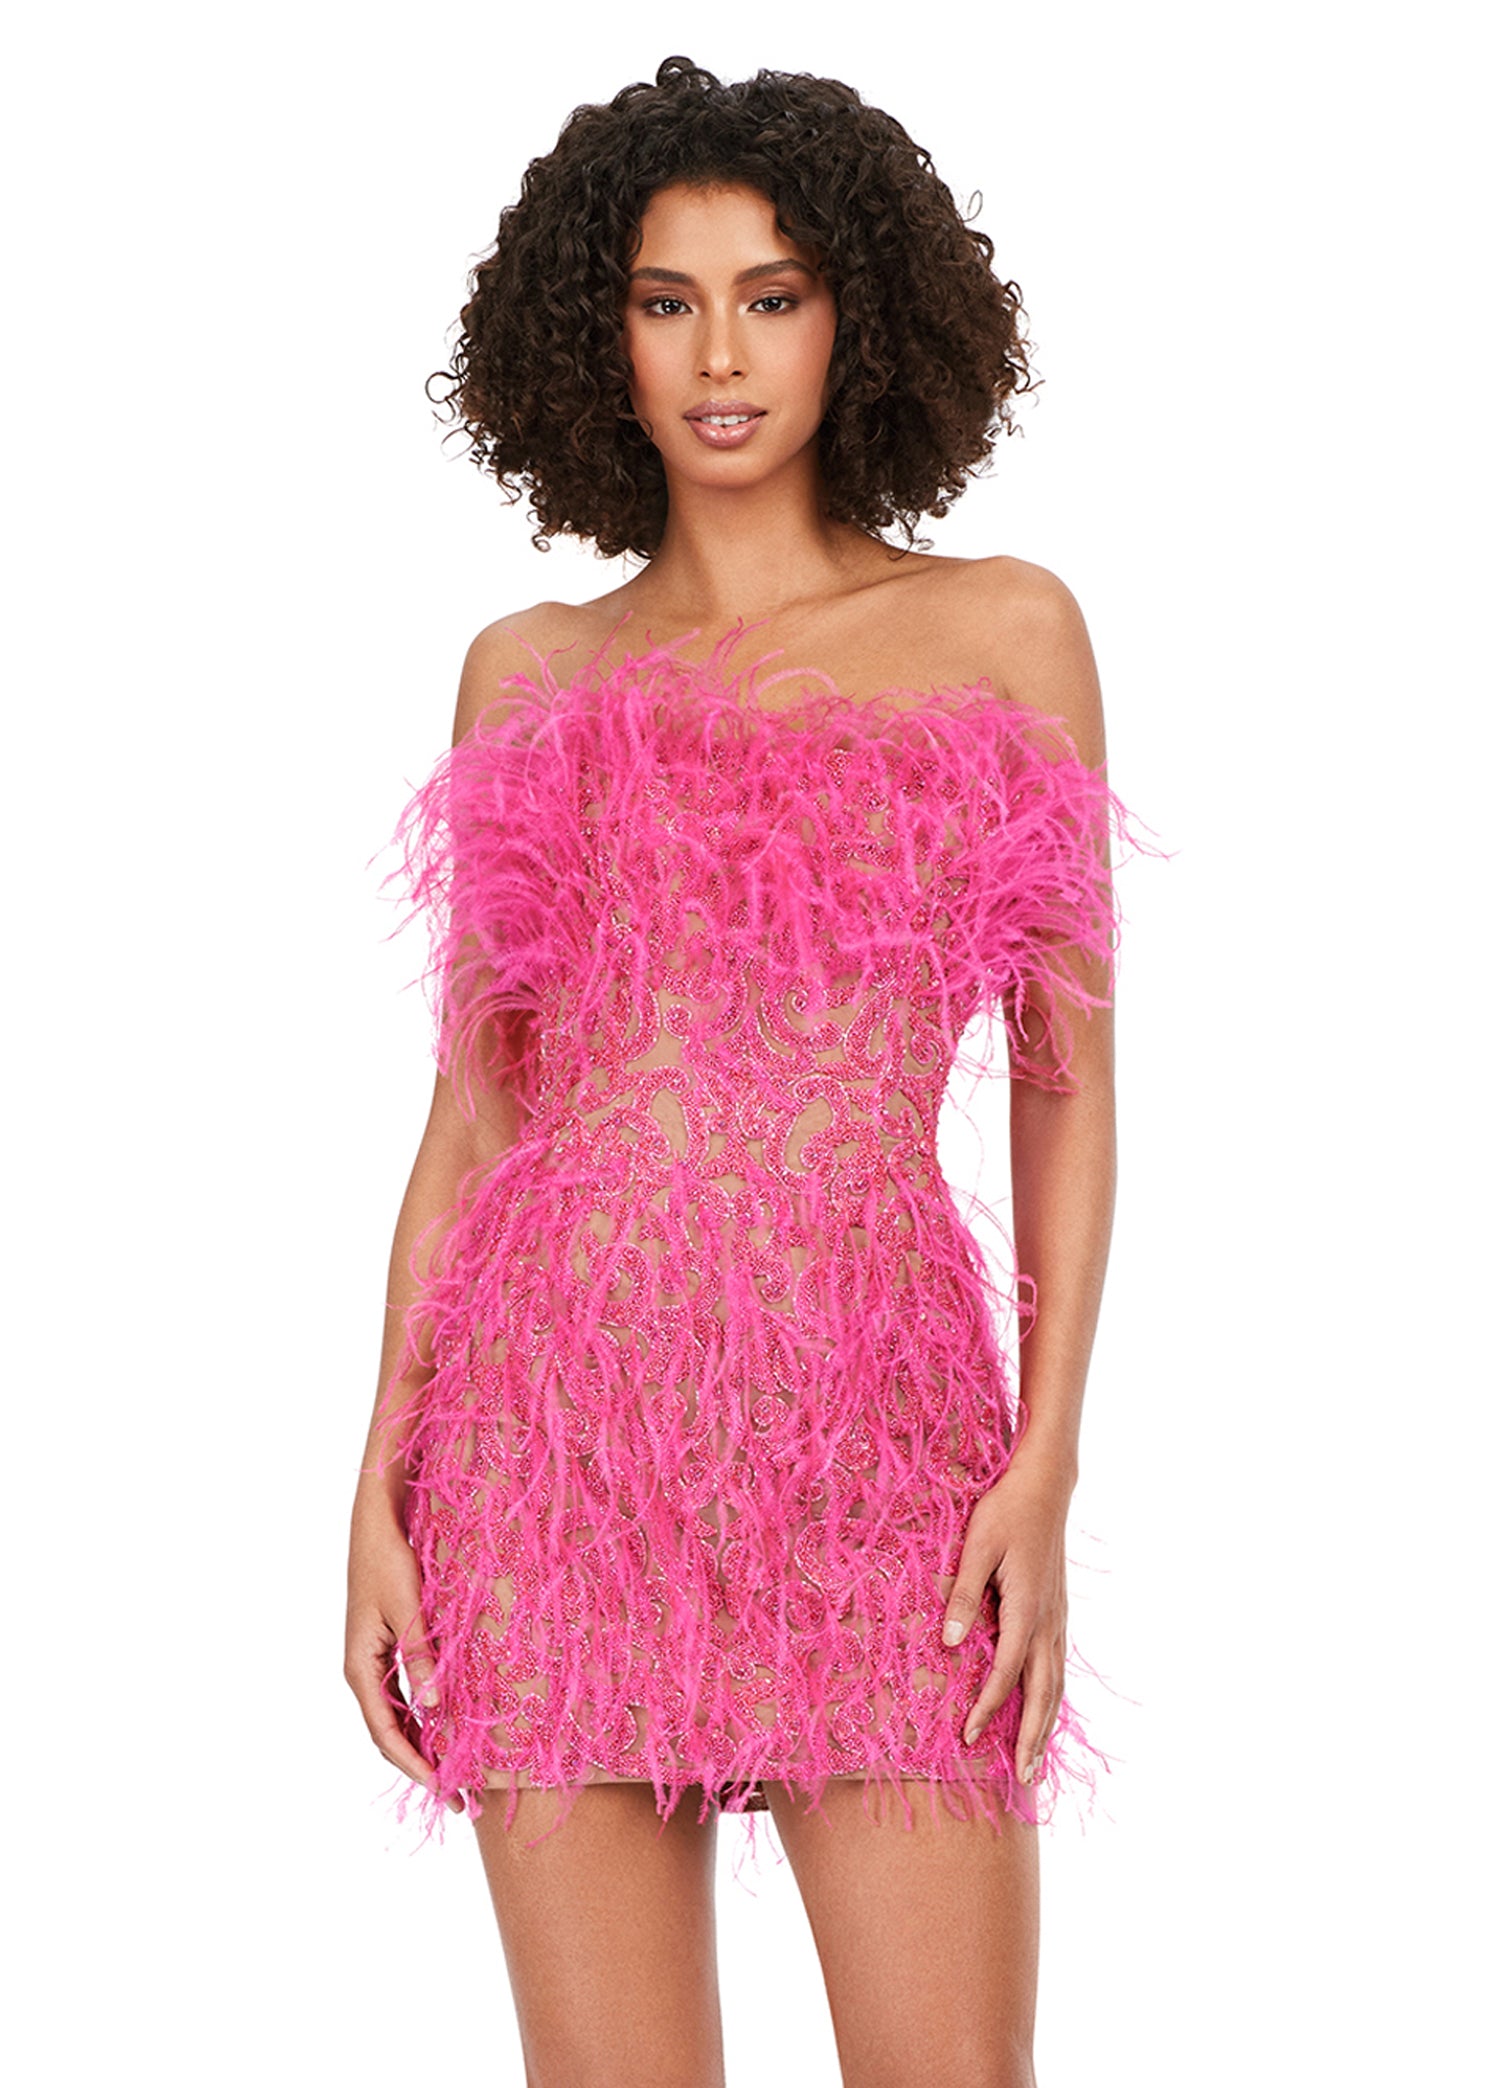 Ashley Lauren 4615 Fully Beaded Strapless Sheer Embellished Bodice Feather Detailing Cocktail Homecoming Dress. Feel like a queen in this fully beaded, strapless cocktail dress. With light feathers throughout, this dress will make a statement at any event!